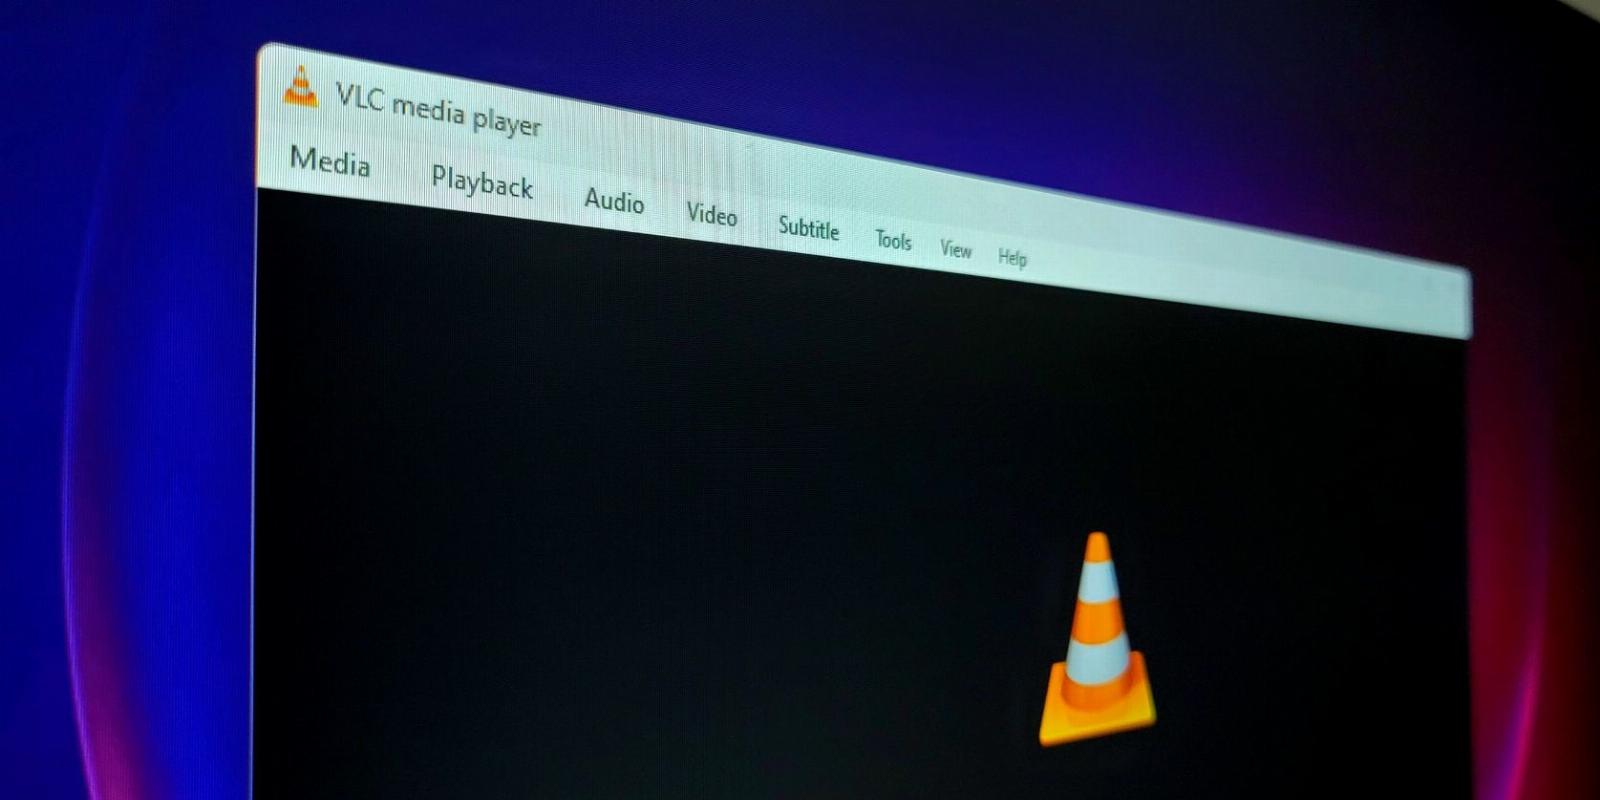 How to Fix the ‘Your Input Can’t Be Opened’ VLC Error on Windows